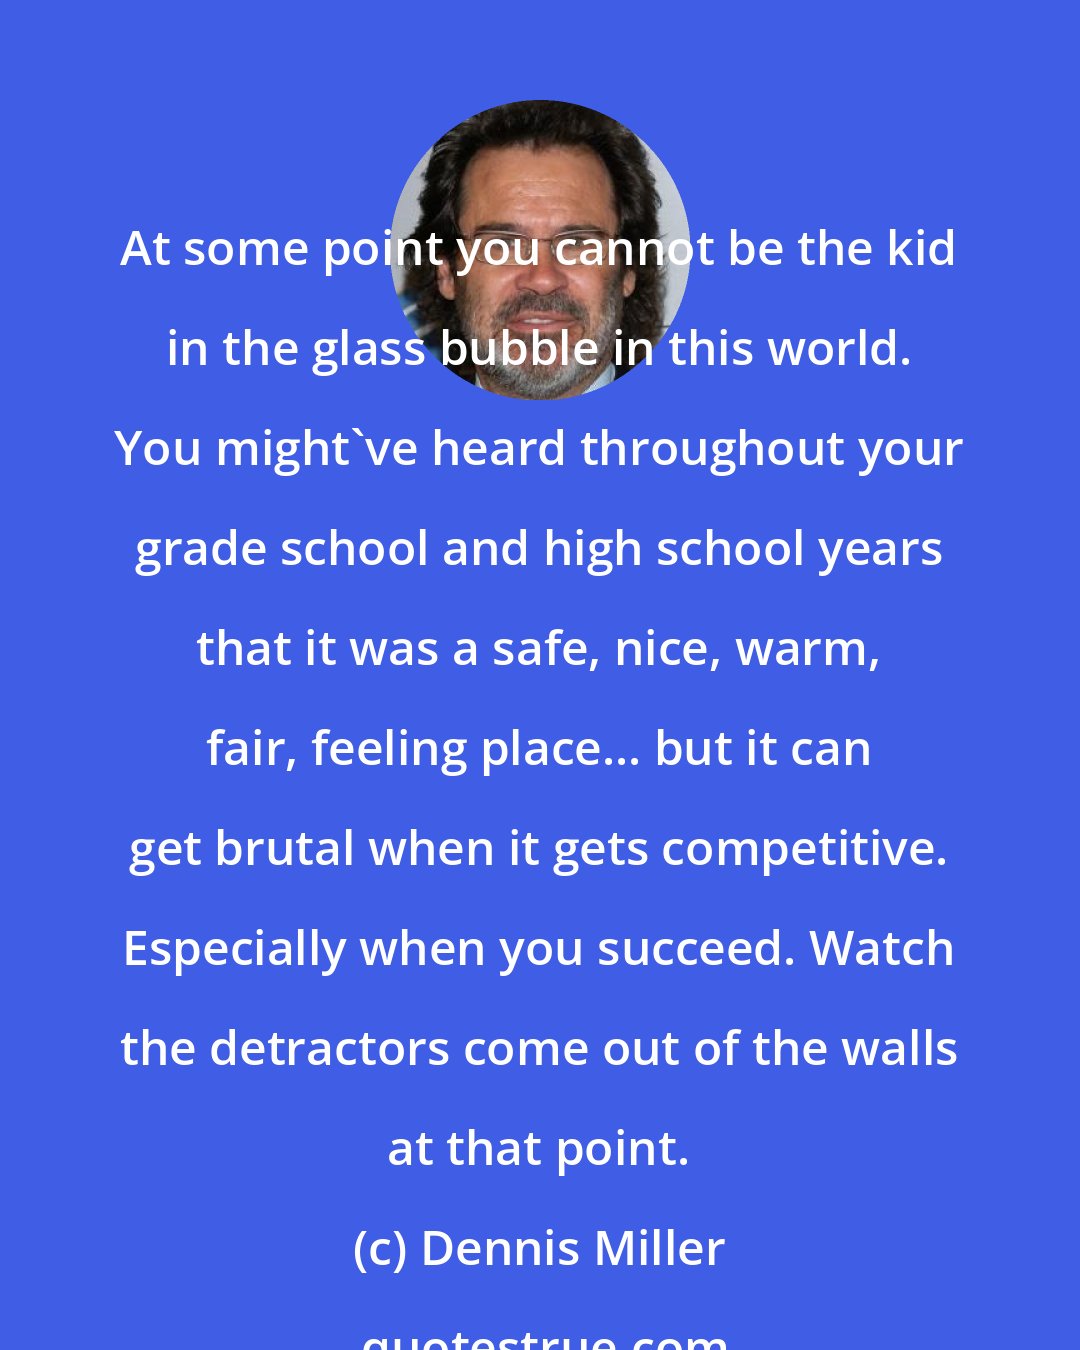 Dennis Miller: At some point you cannot be the kid in the glass bubble in this world. You might've heard throughout your grade school and high school years that it was a safe, nice, warm, fair, feeling place... but it can get brutal when it gets competitive. Especially when you succeed. Watch the detractors come out of the walls at that point.